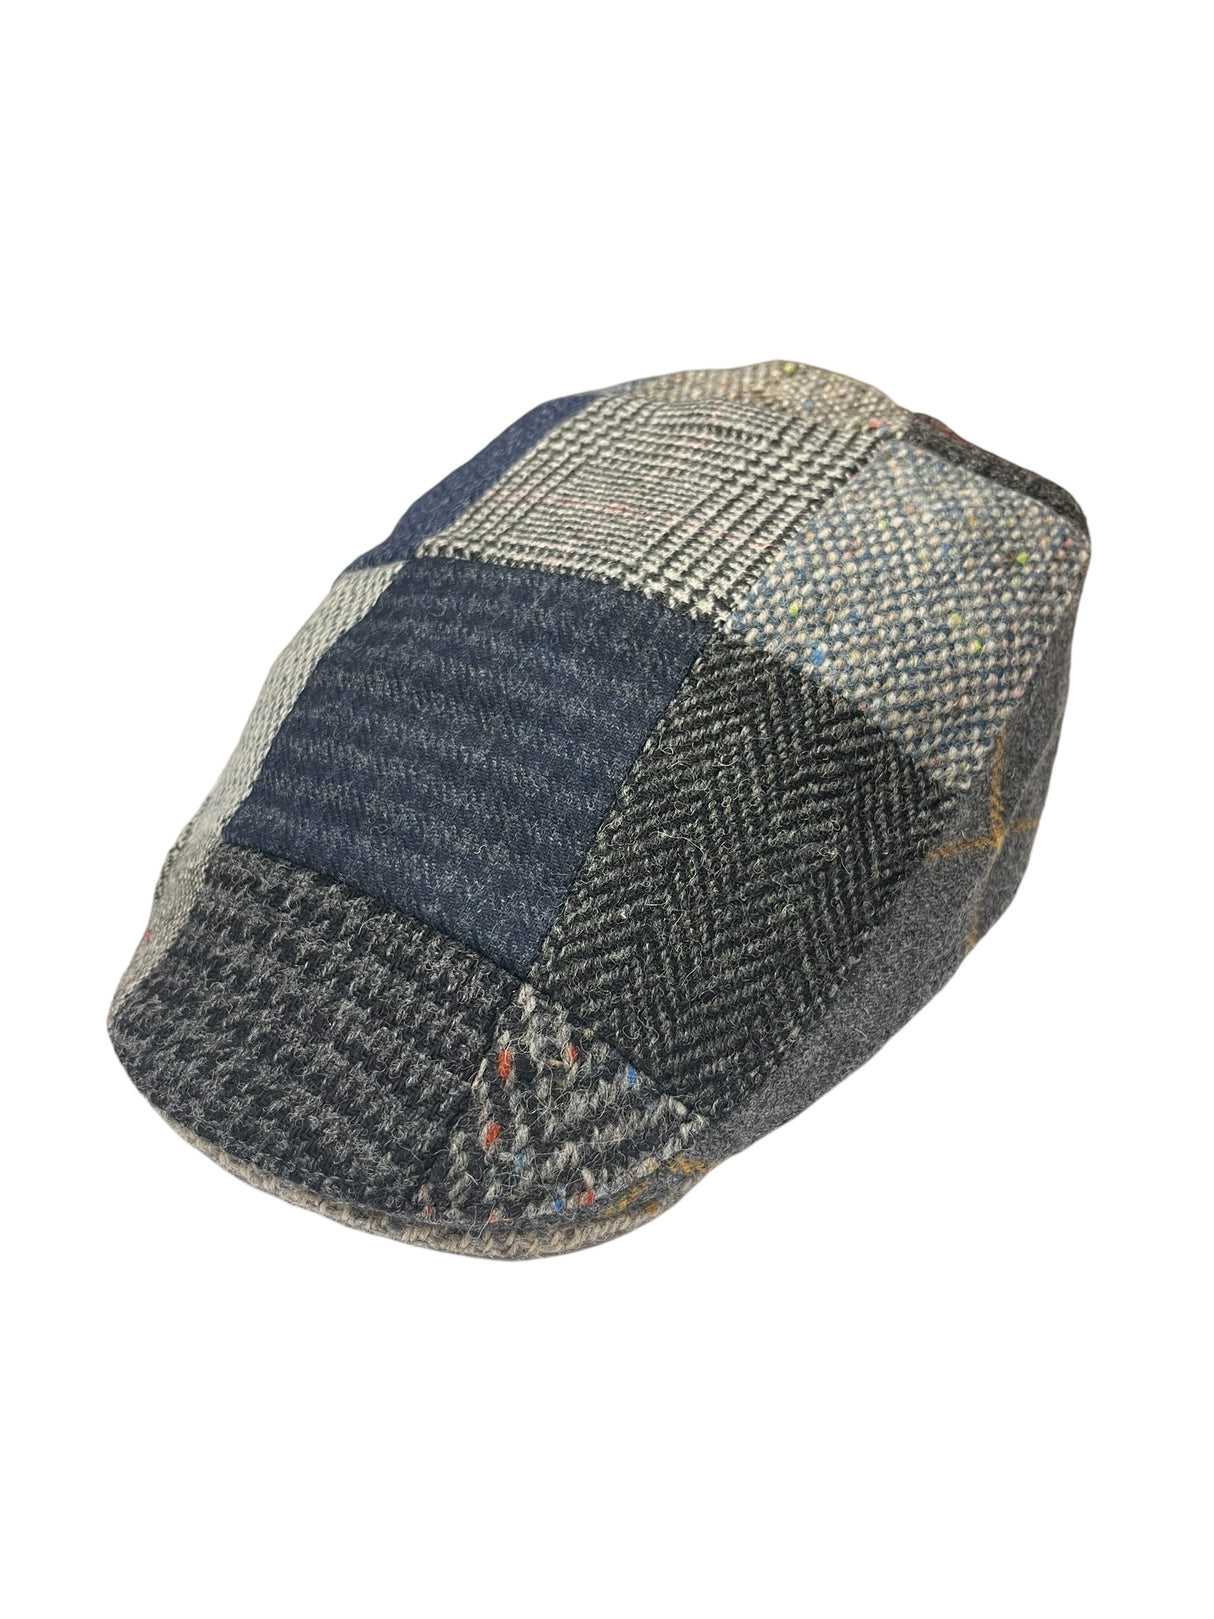 Wool Patchwork - Donegal Touring Cap Muted Colors Wool Patchwork - X-Large